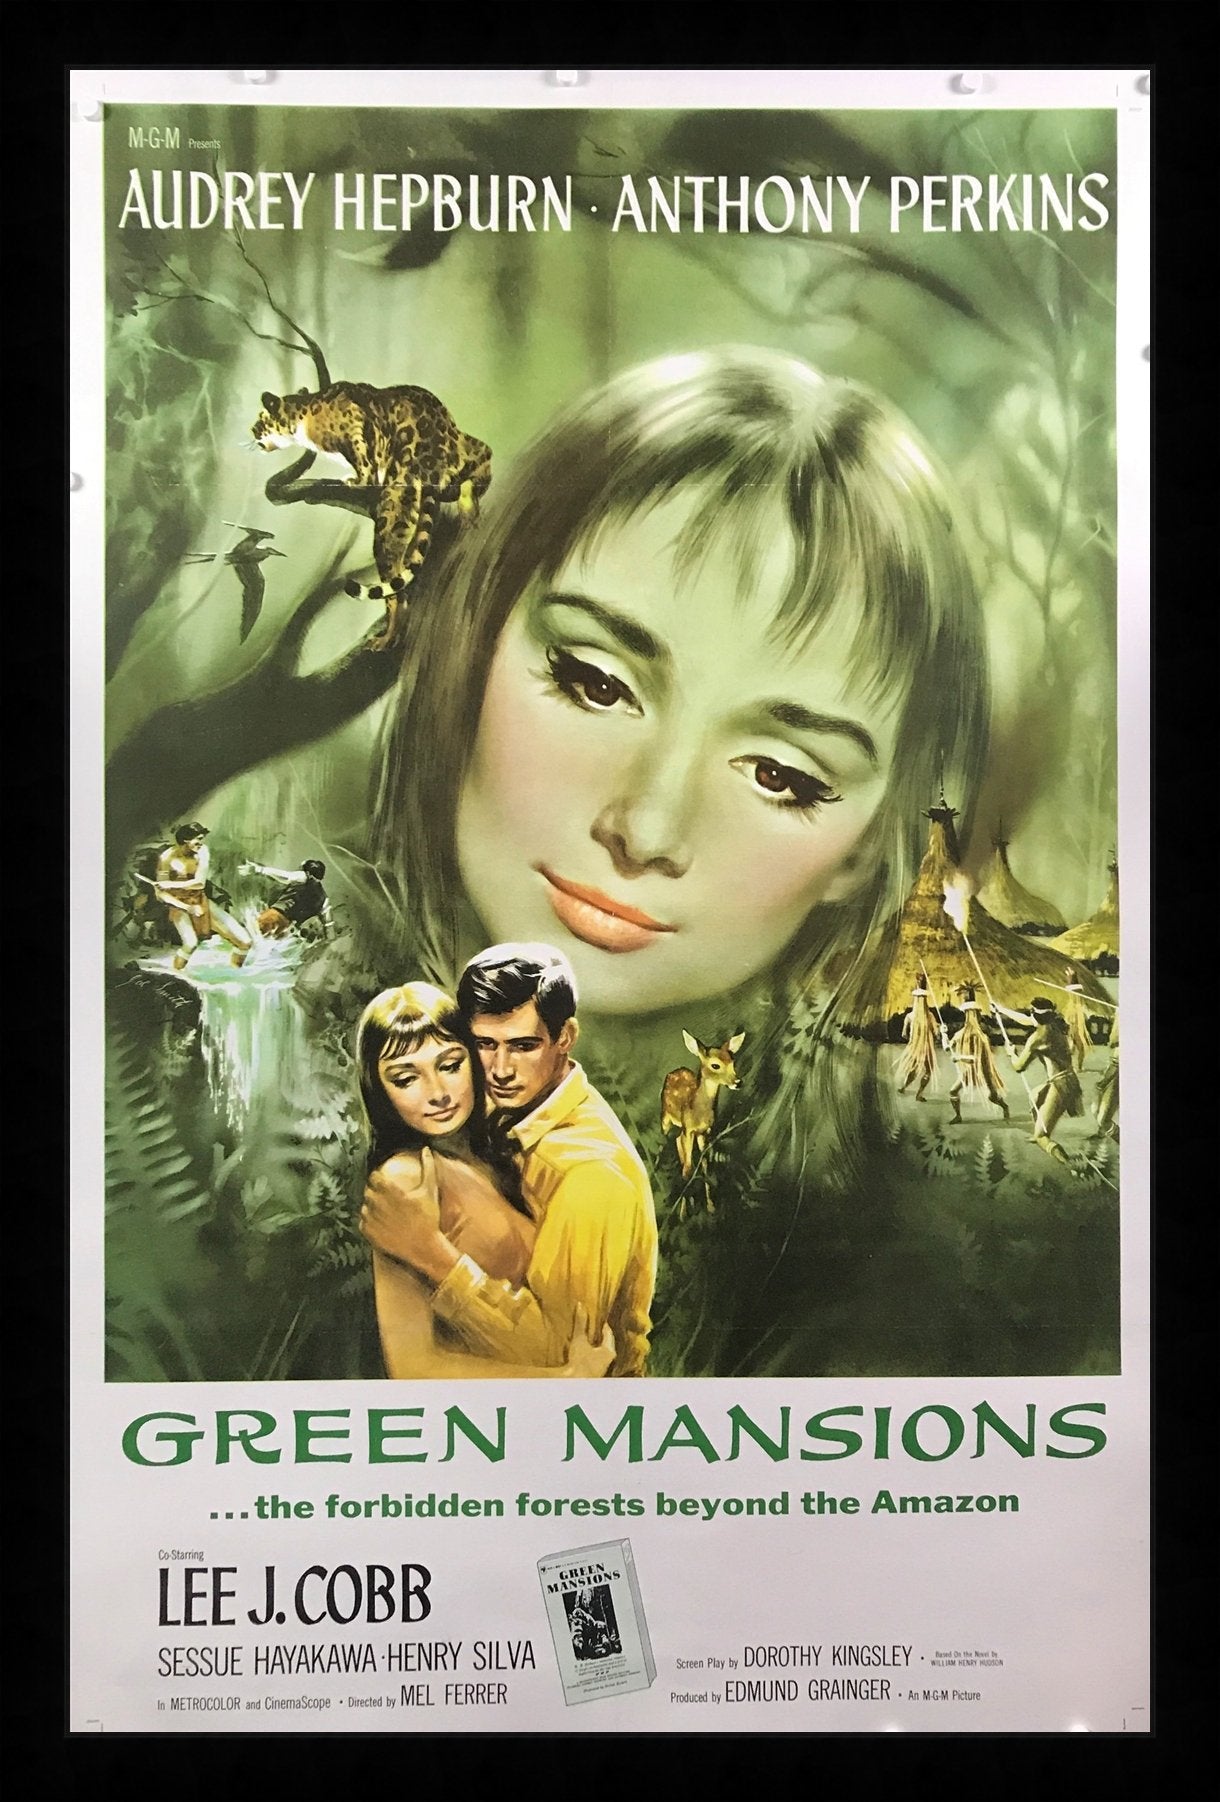 An original movie poster for the film Green Mansions